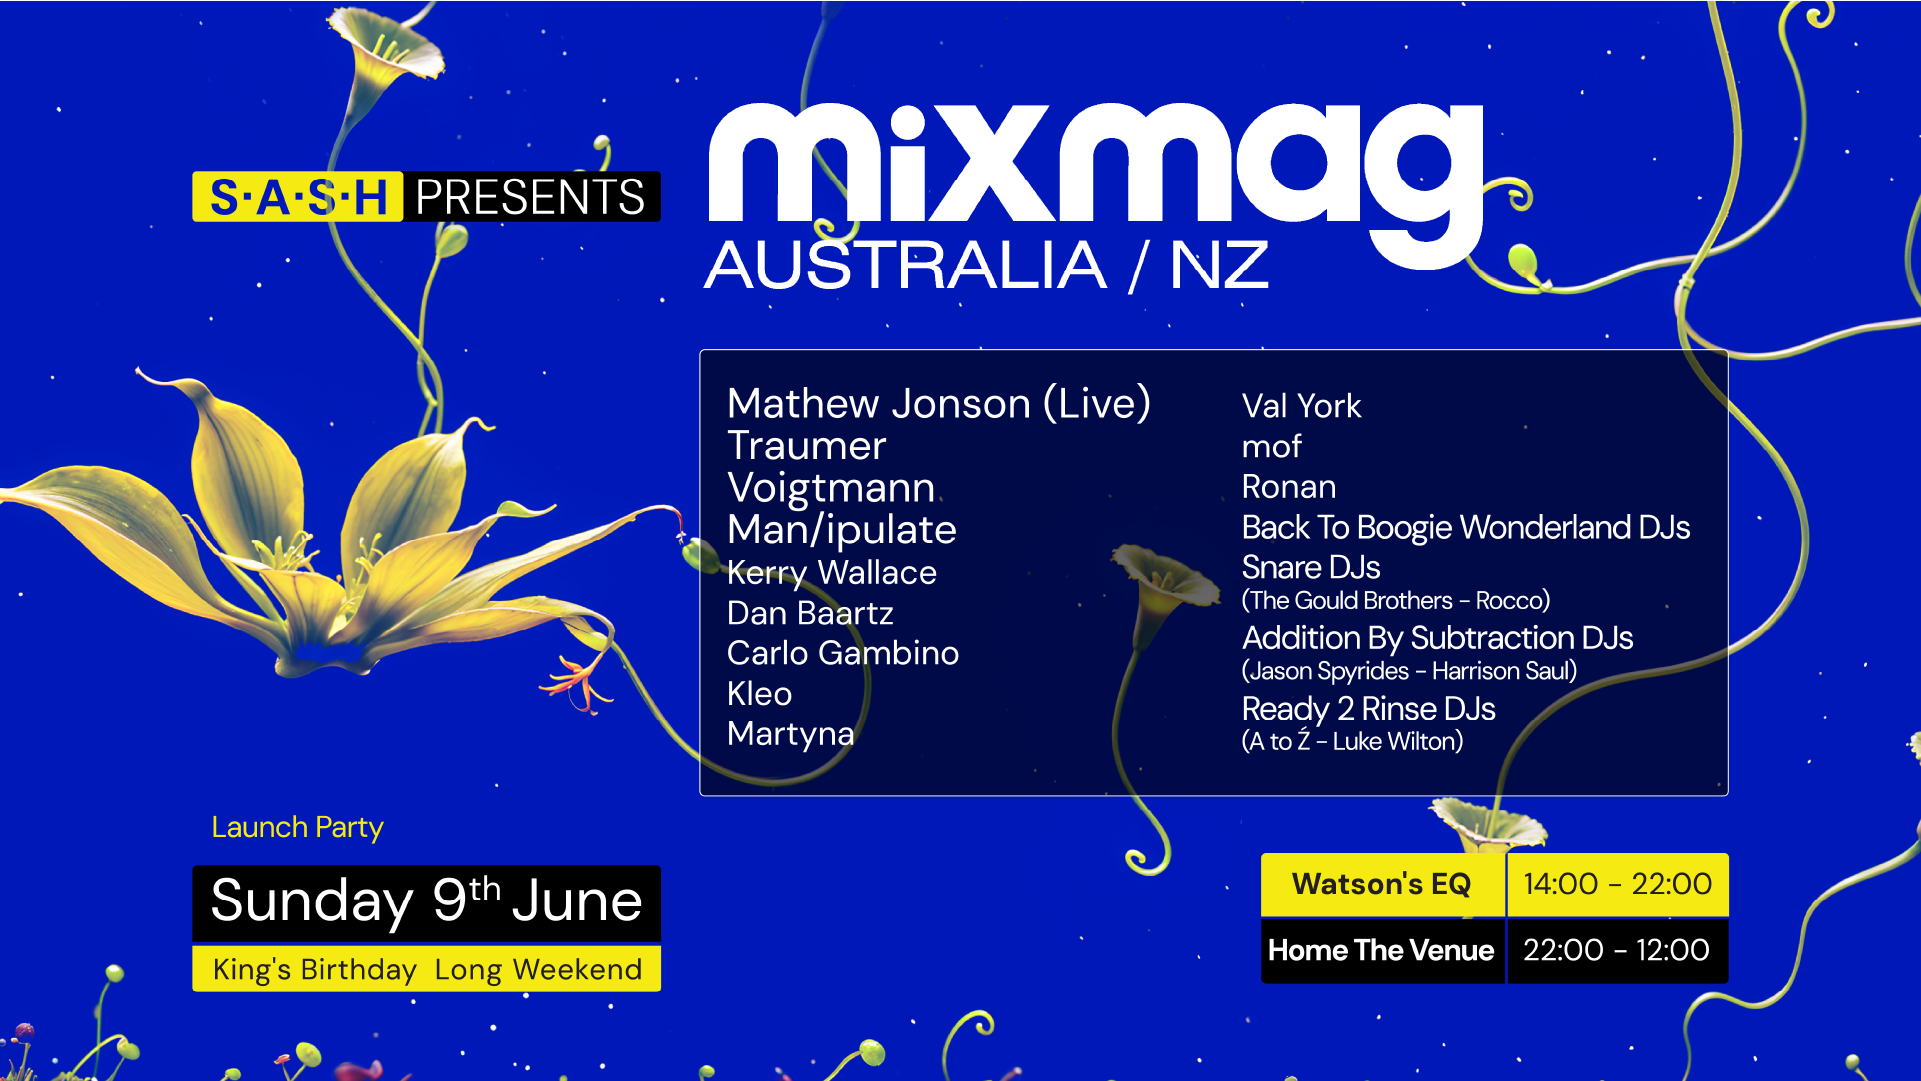 ★ S.A.S.H presents Mixmag Australia/NZ Launch Party ★ June Long Weekend ★ - フライヤー裏